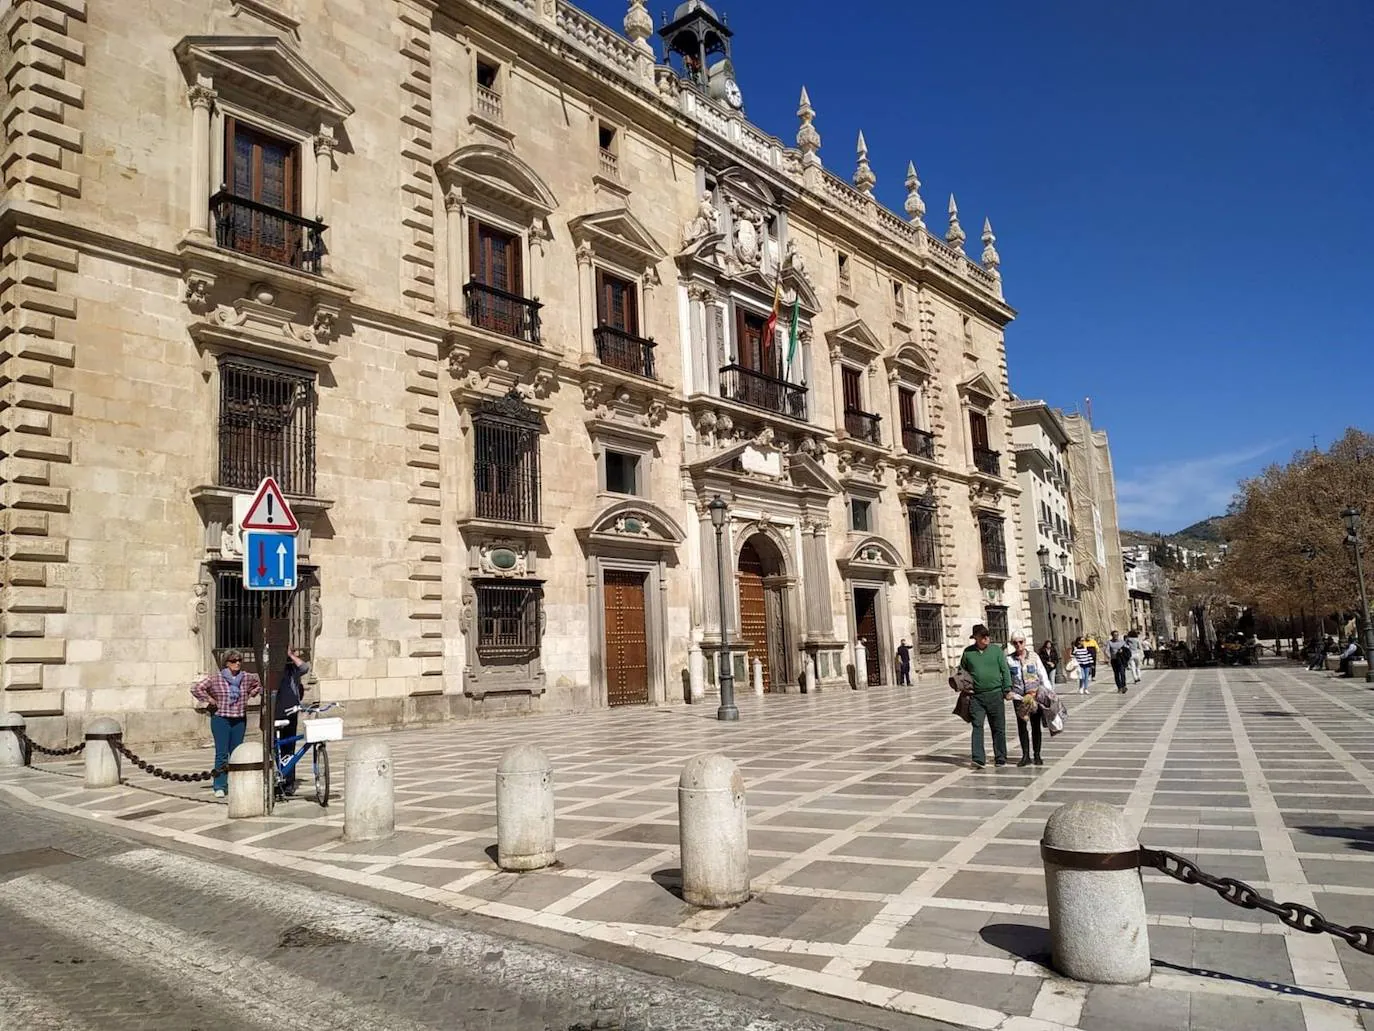 The Andalusian High Court of Justice